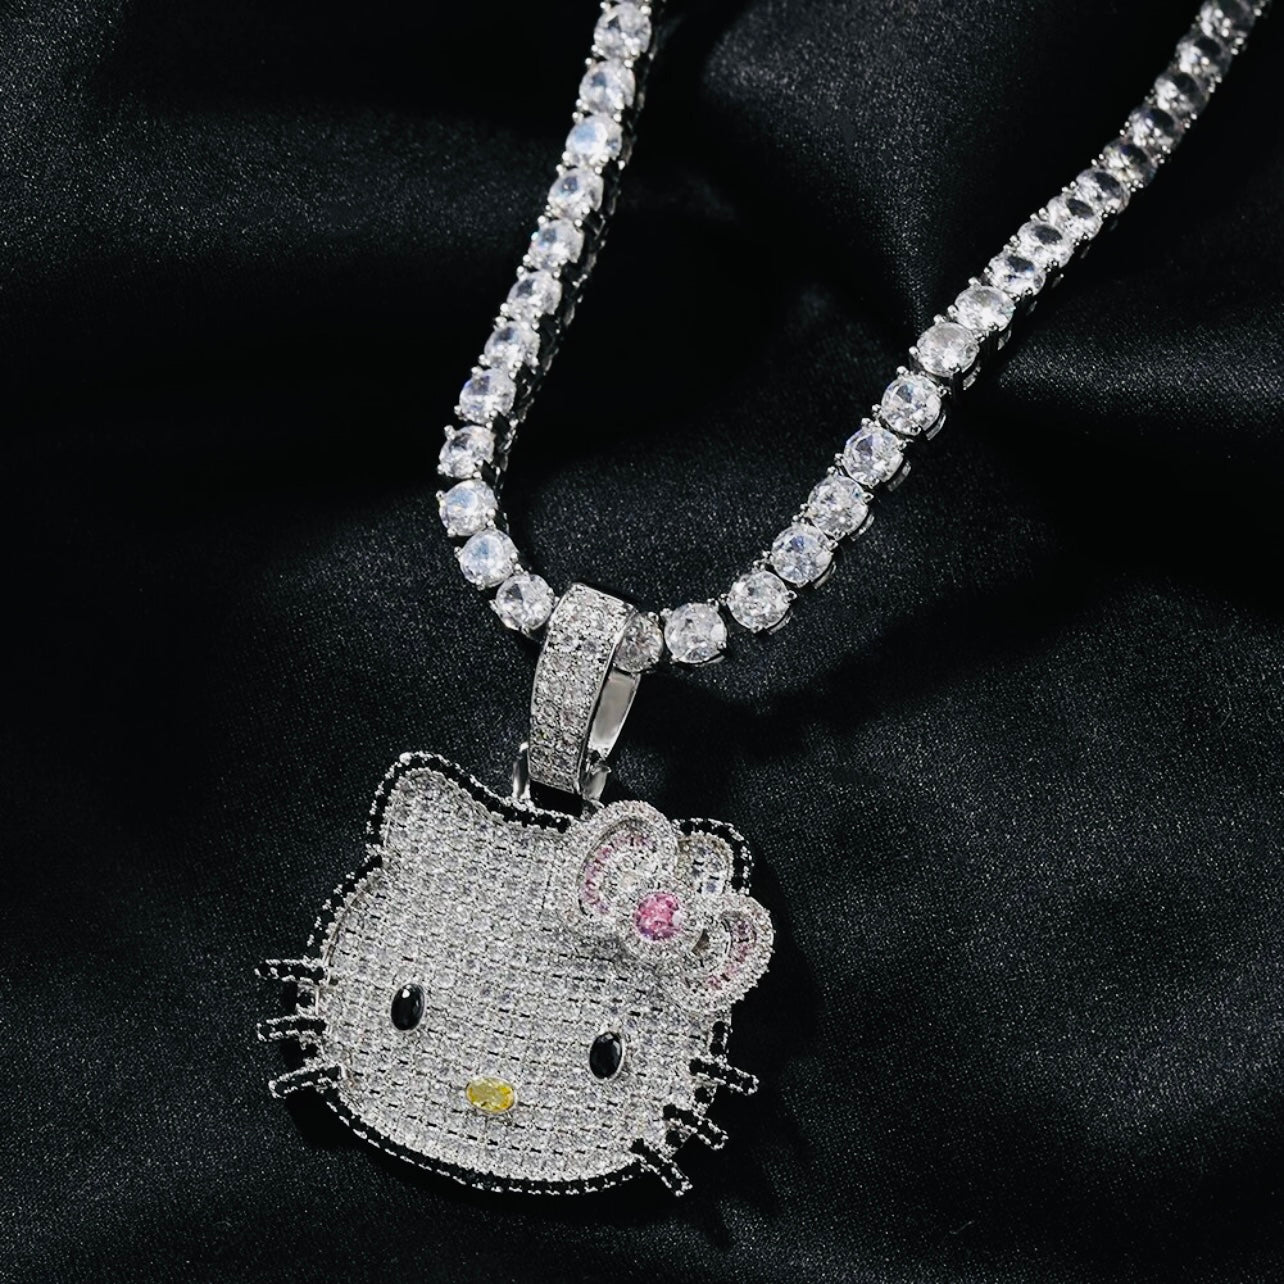 Kawaii “Hello Kitty” Blinged Out Sapphire Rubies Chrystal Cat Pendant w/Chain | Hypoallergenic Unisex Statement Piece